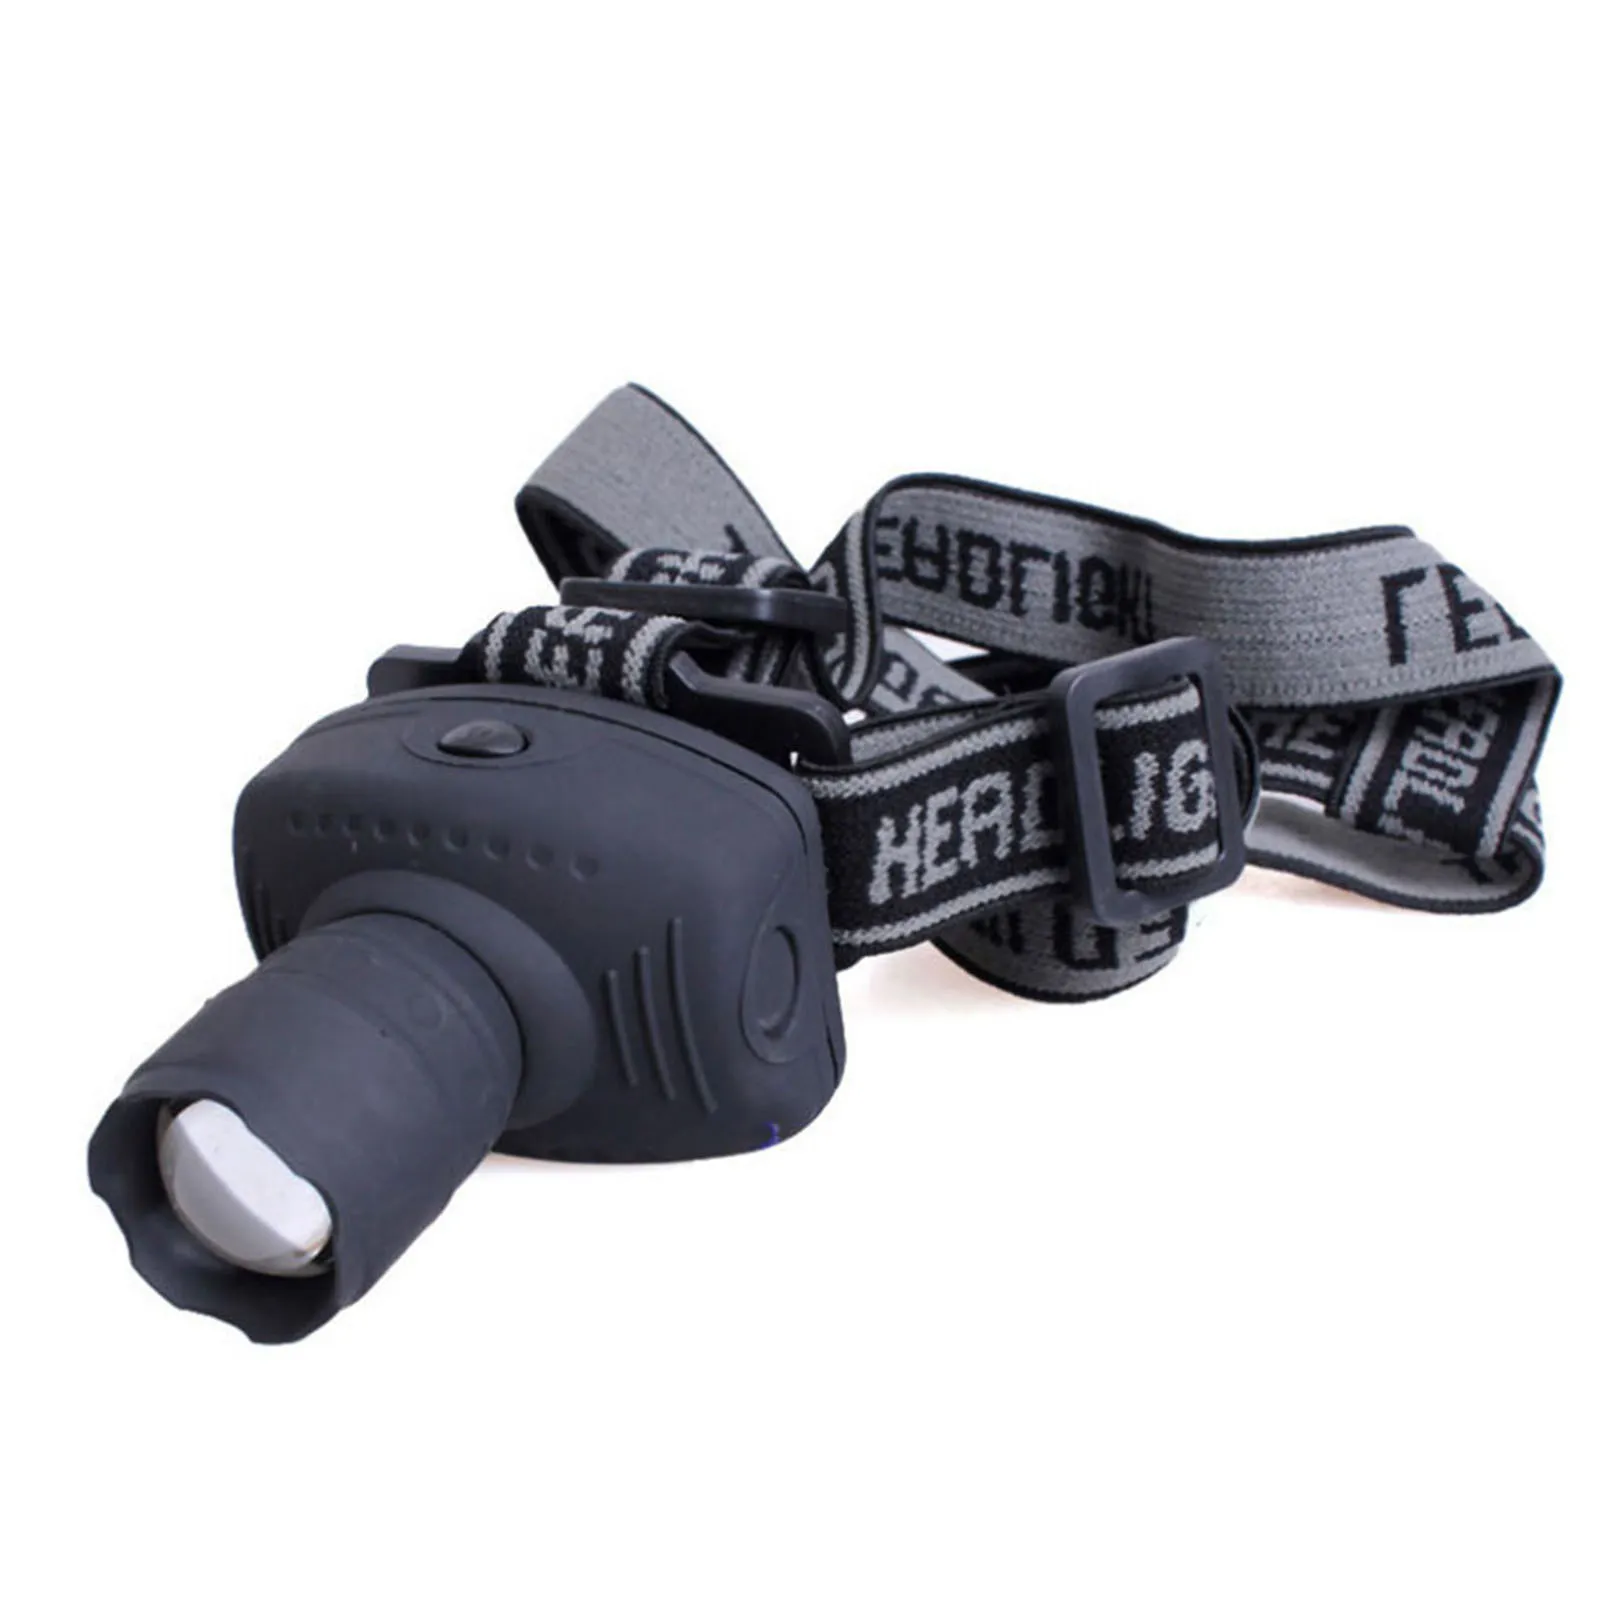 

3W LED Headlamp Flashlights Frontal Lantern Zoomable Head Torch Light for Night Flying Sailing Caving HEE889